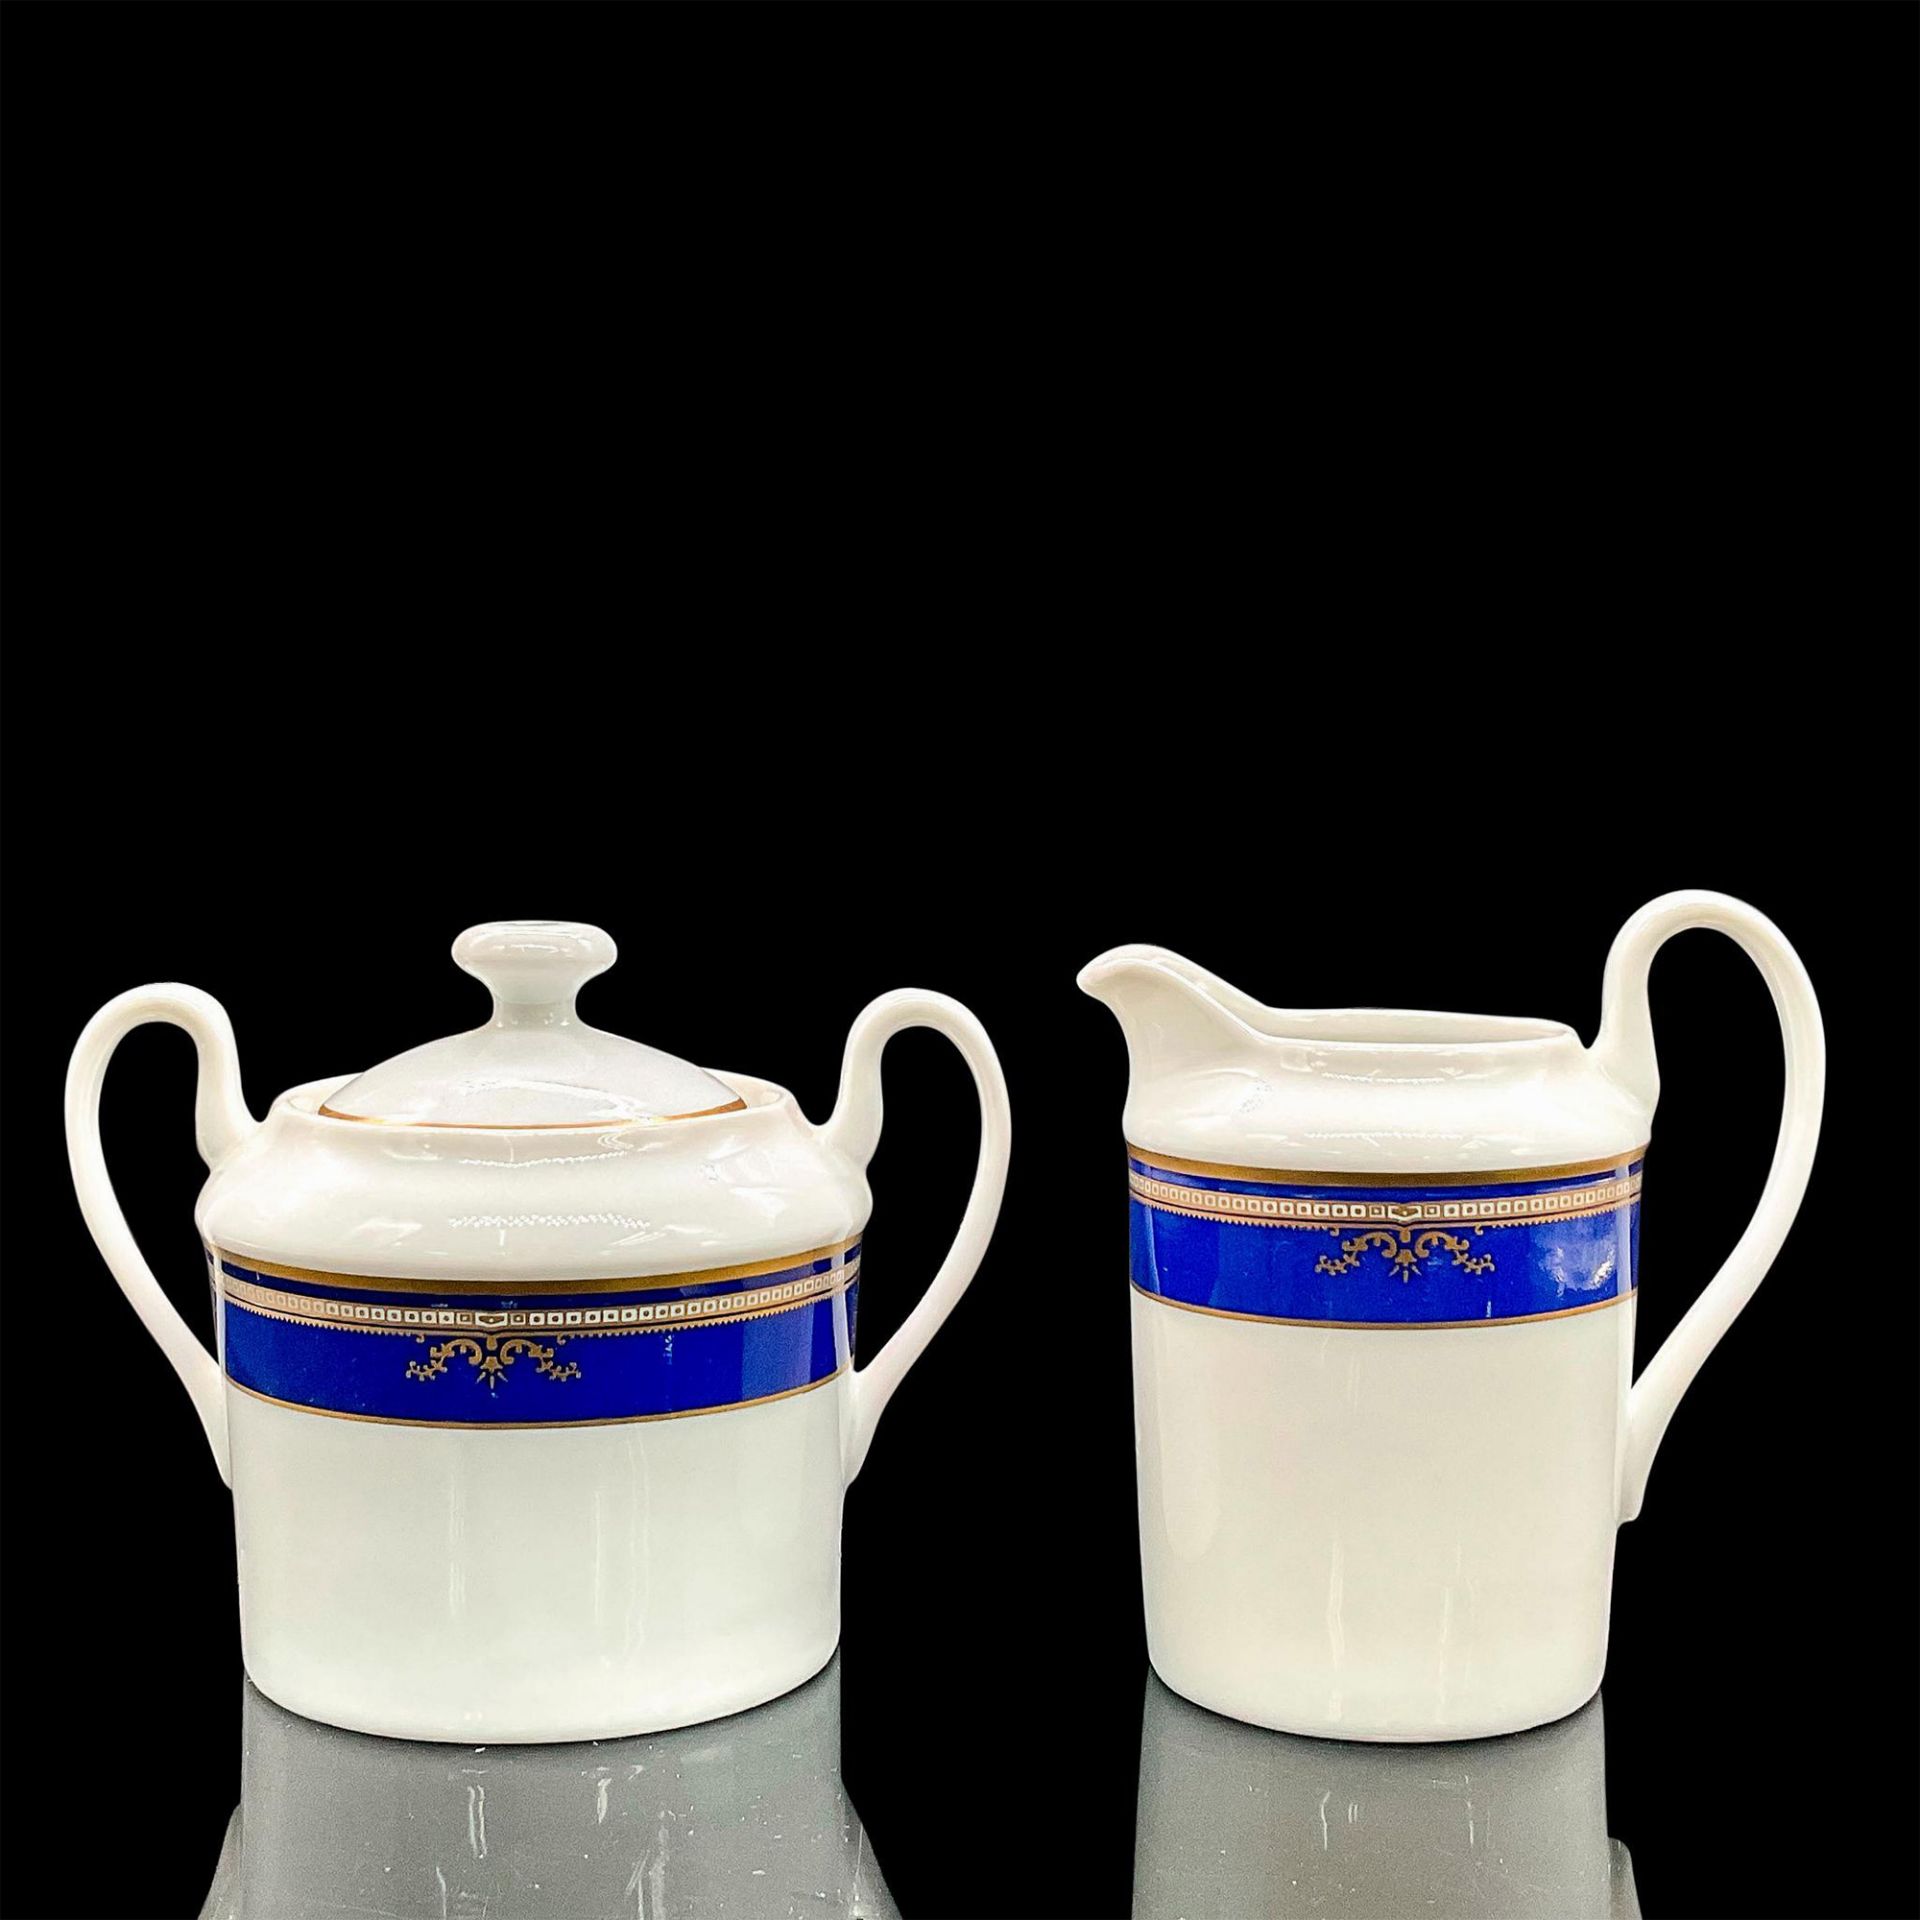 6pc Tea Serving Set, Queen Mary and Titanic Replicas - Image 6 of 16